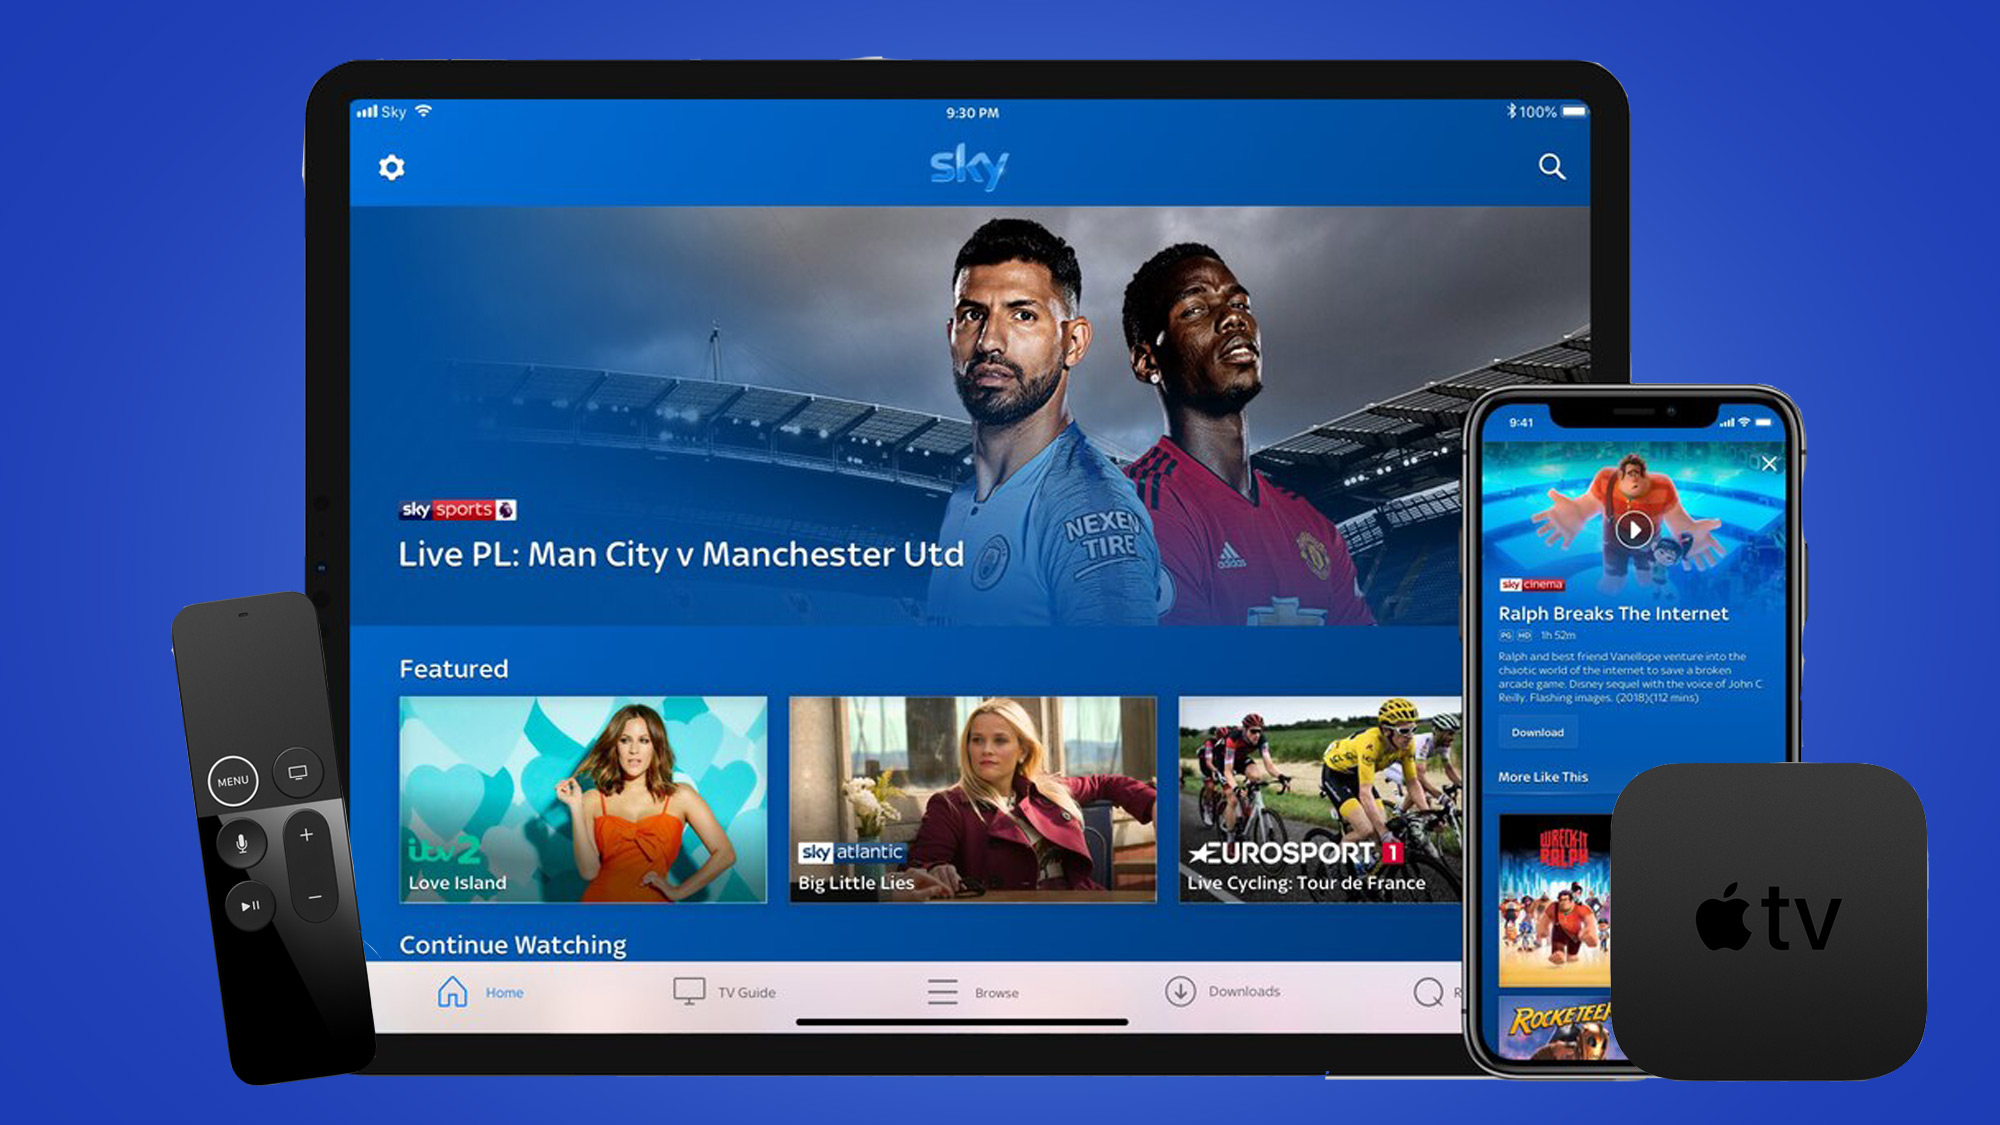 Sky Go On Apple Tv How To Watch, Can You Mirror Skygo From Iphone To Apple Tv